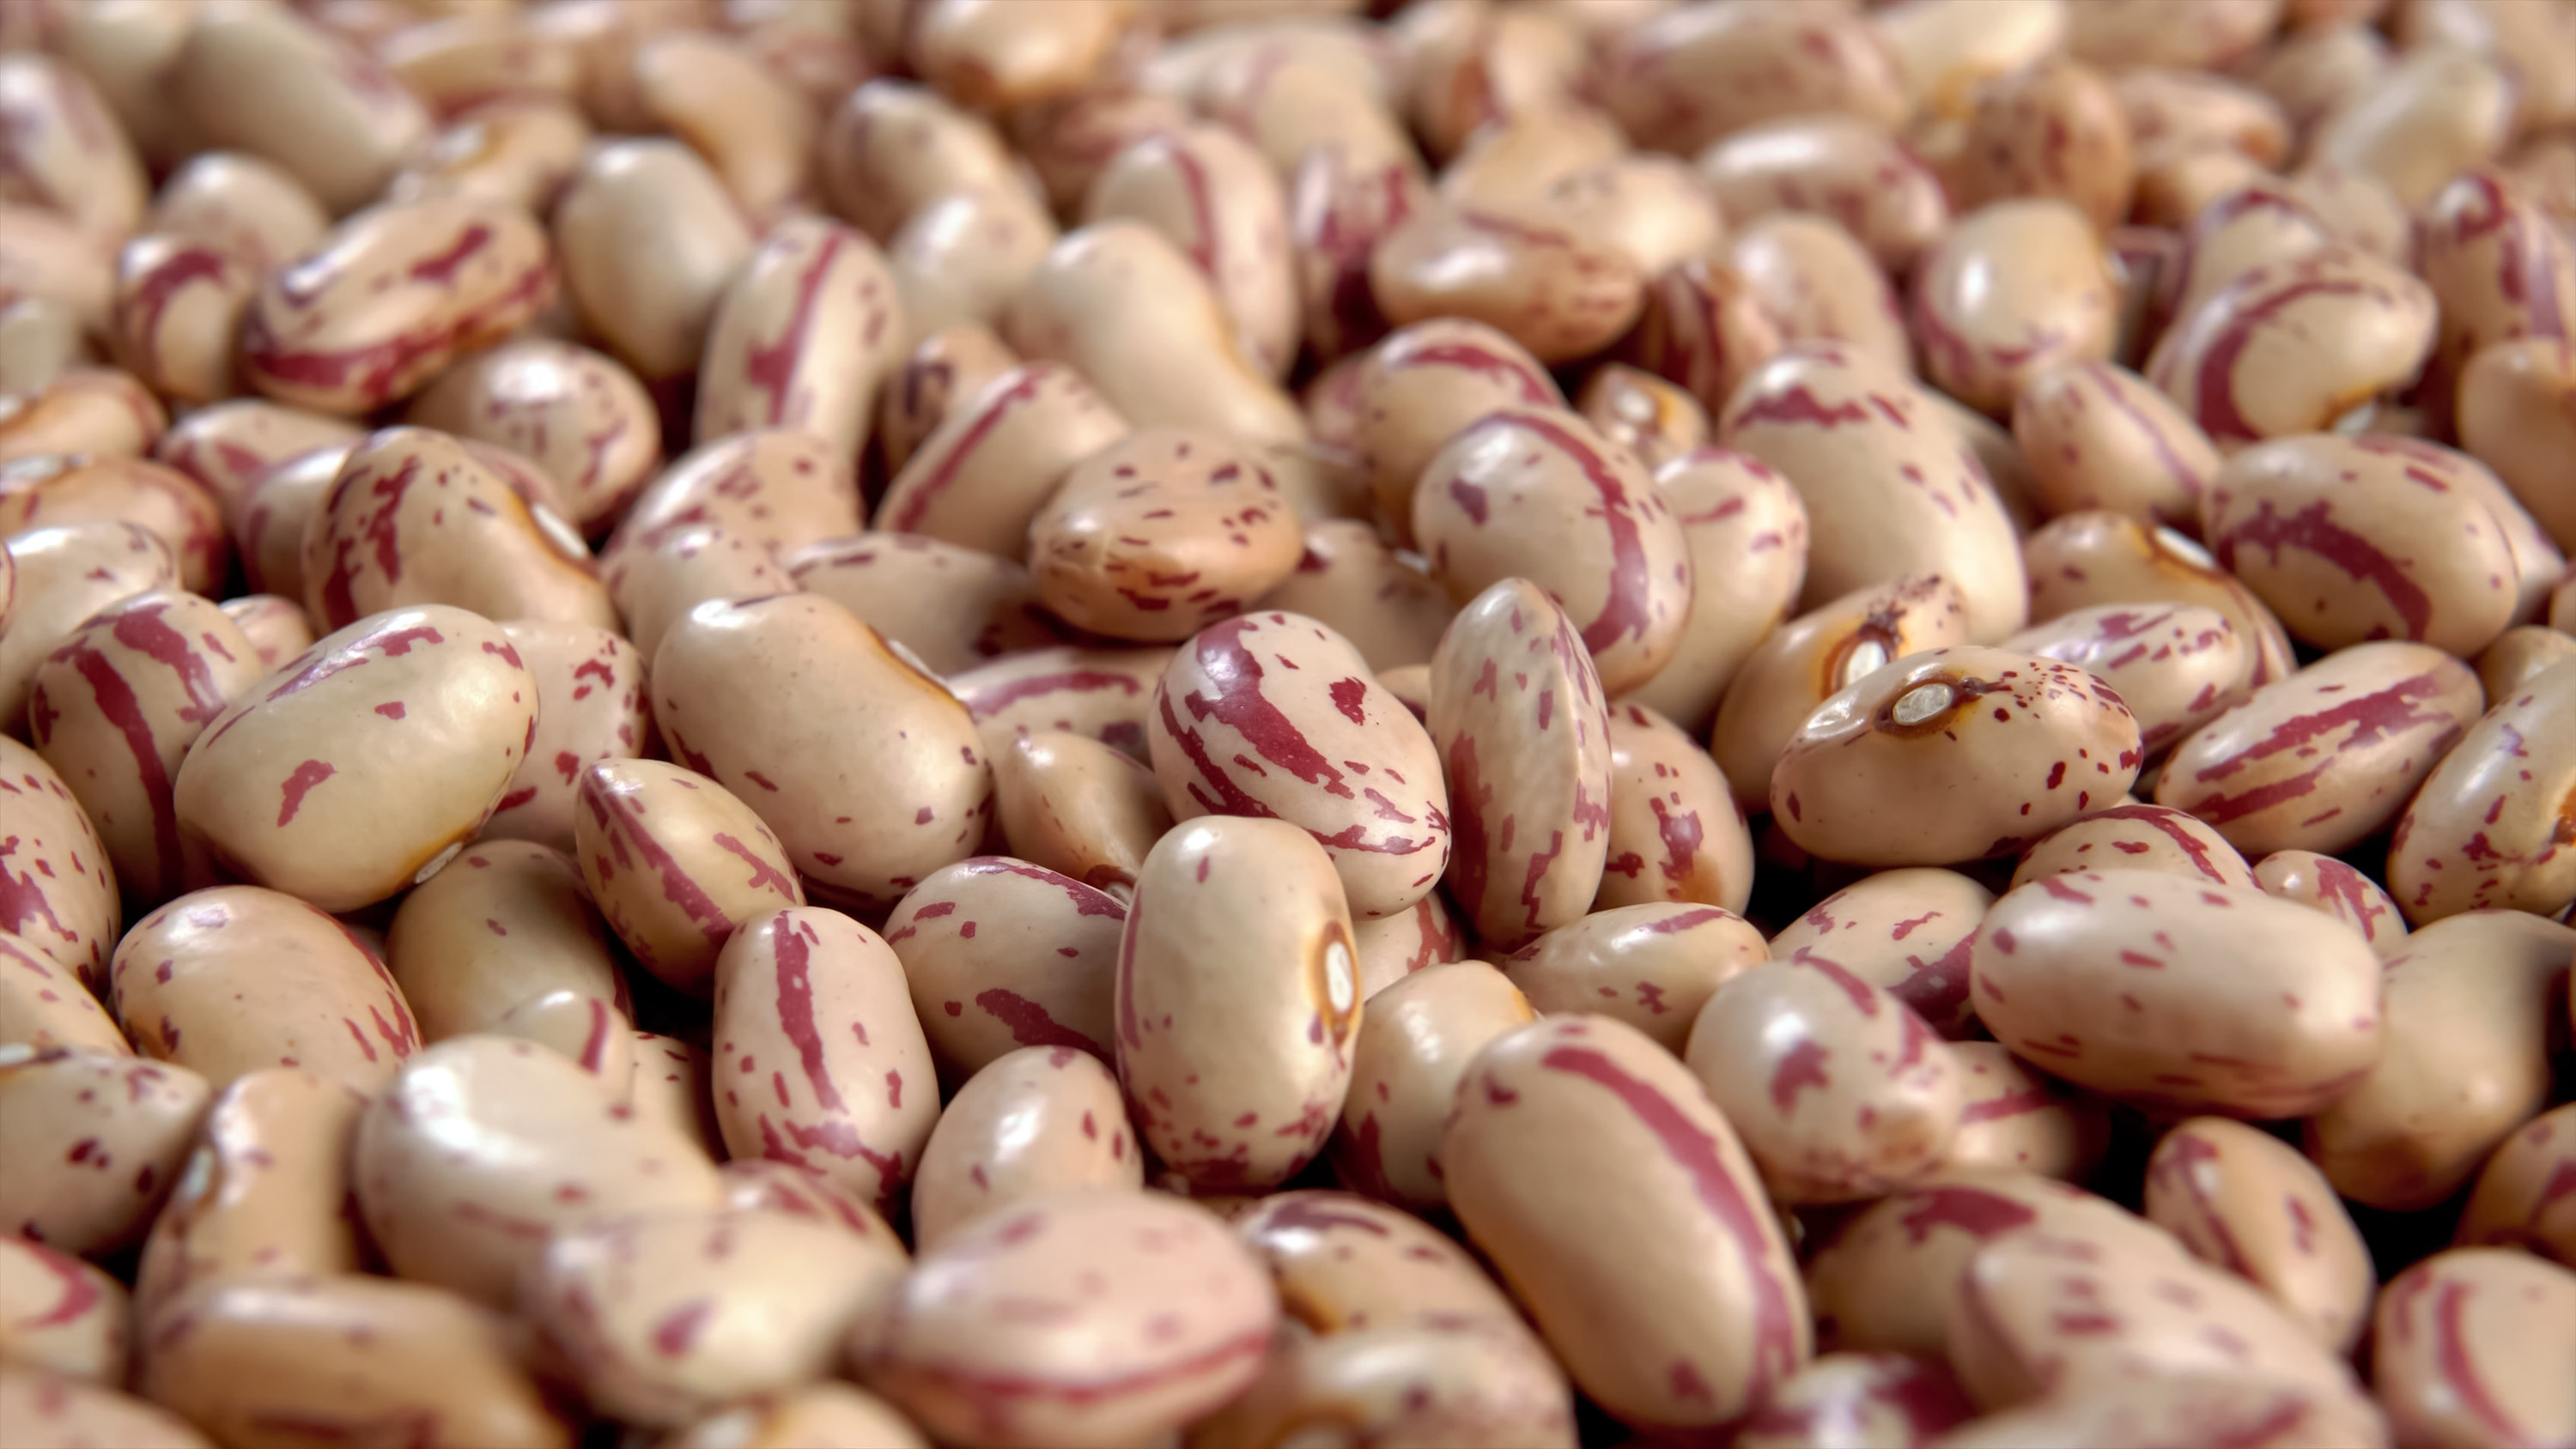 A close-up image of pinto beans